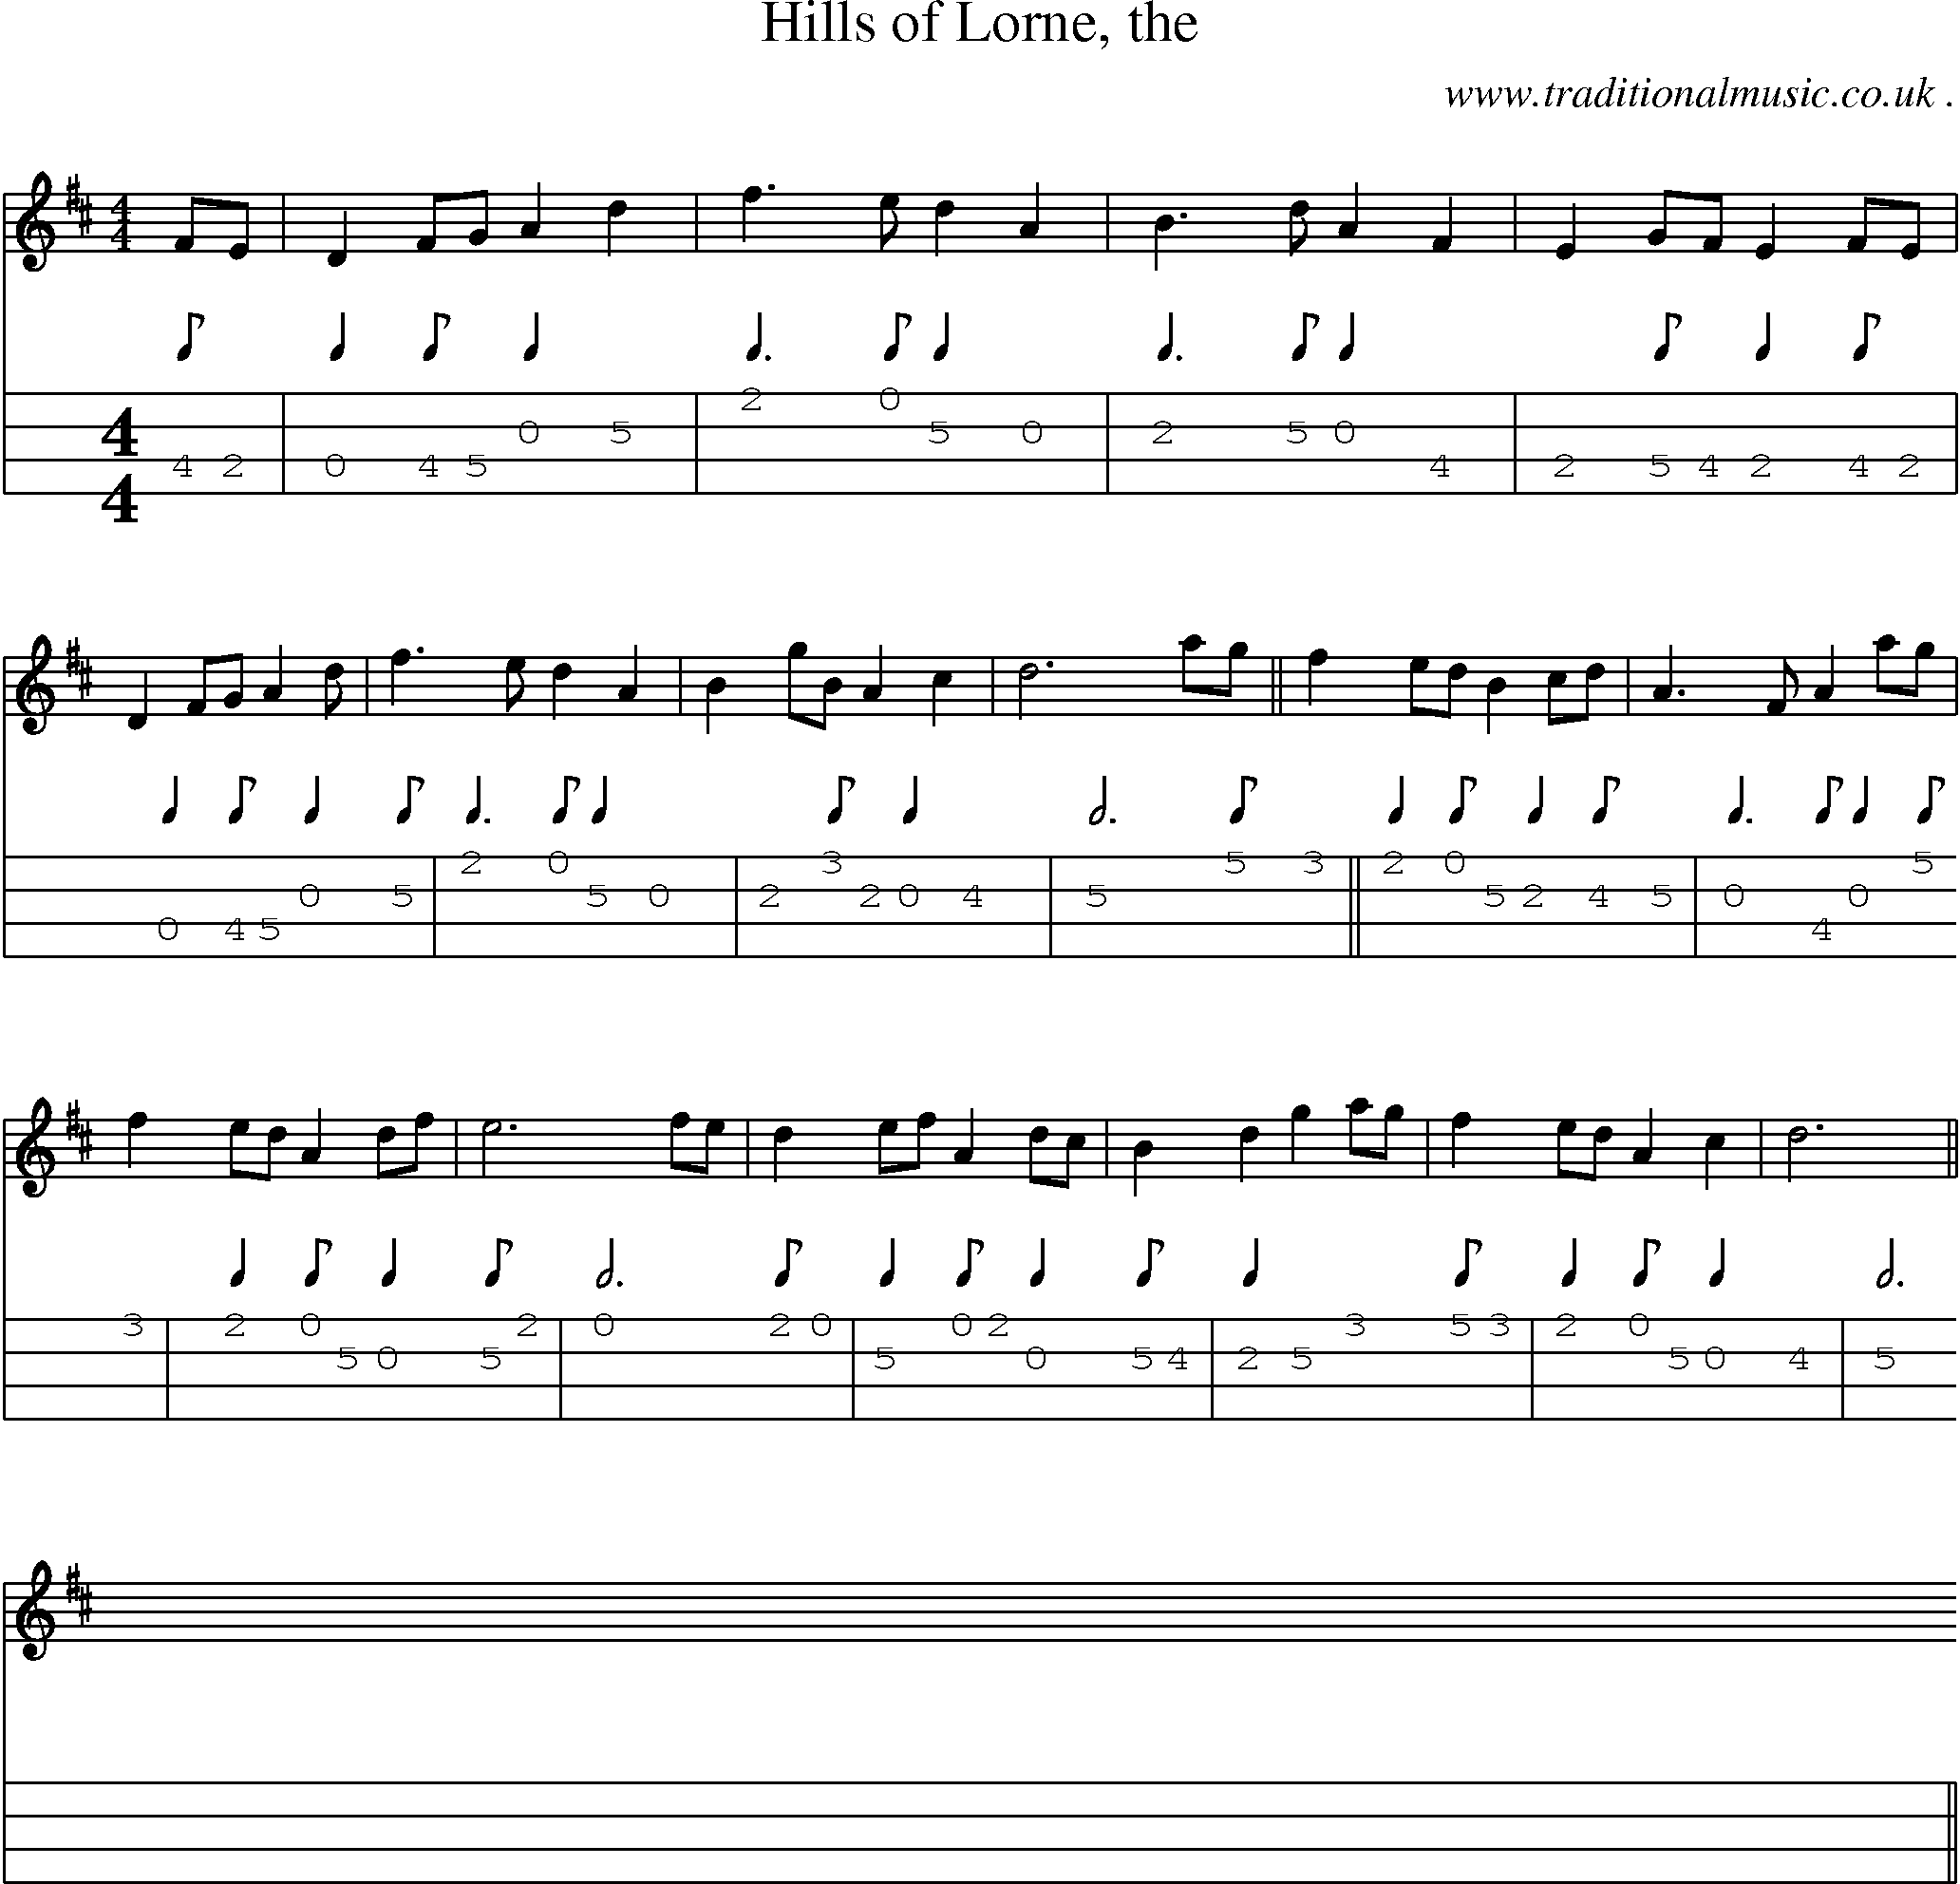 Sheet-music  score, Chords and Mandolin Tabs for Hills Of Lorne The